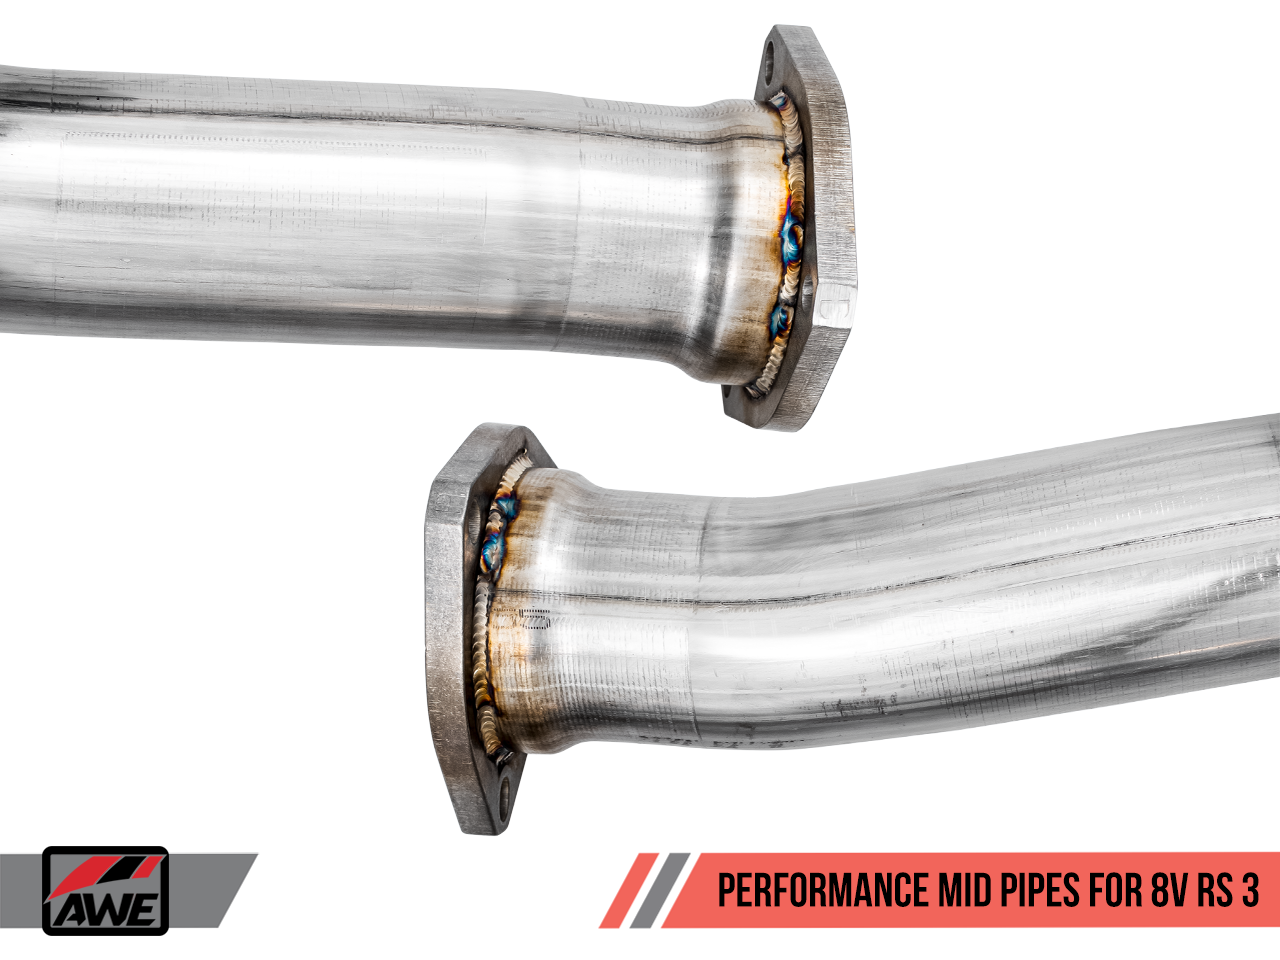 AWE Performance Mid Pipes for Audi 8V RS 3 - 0